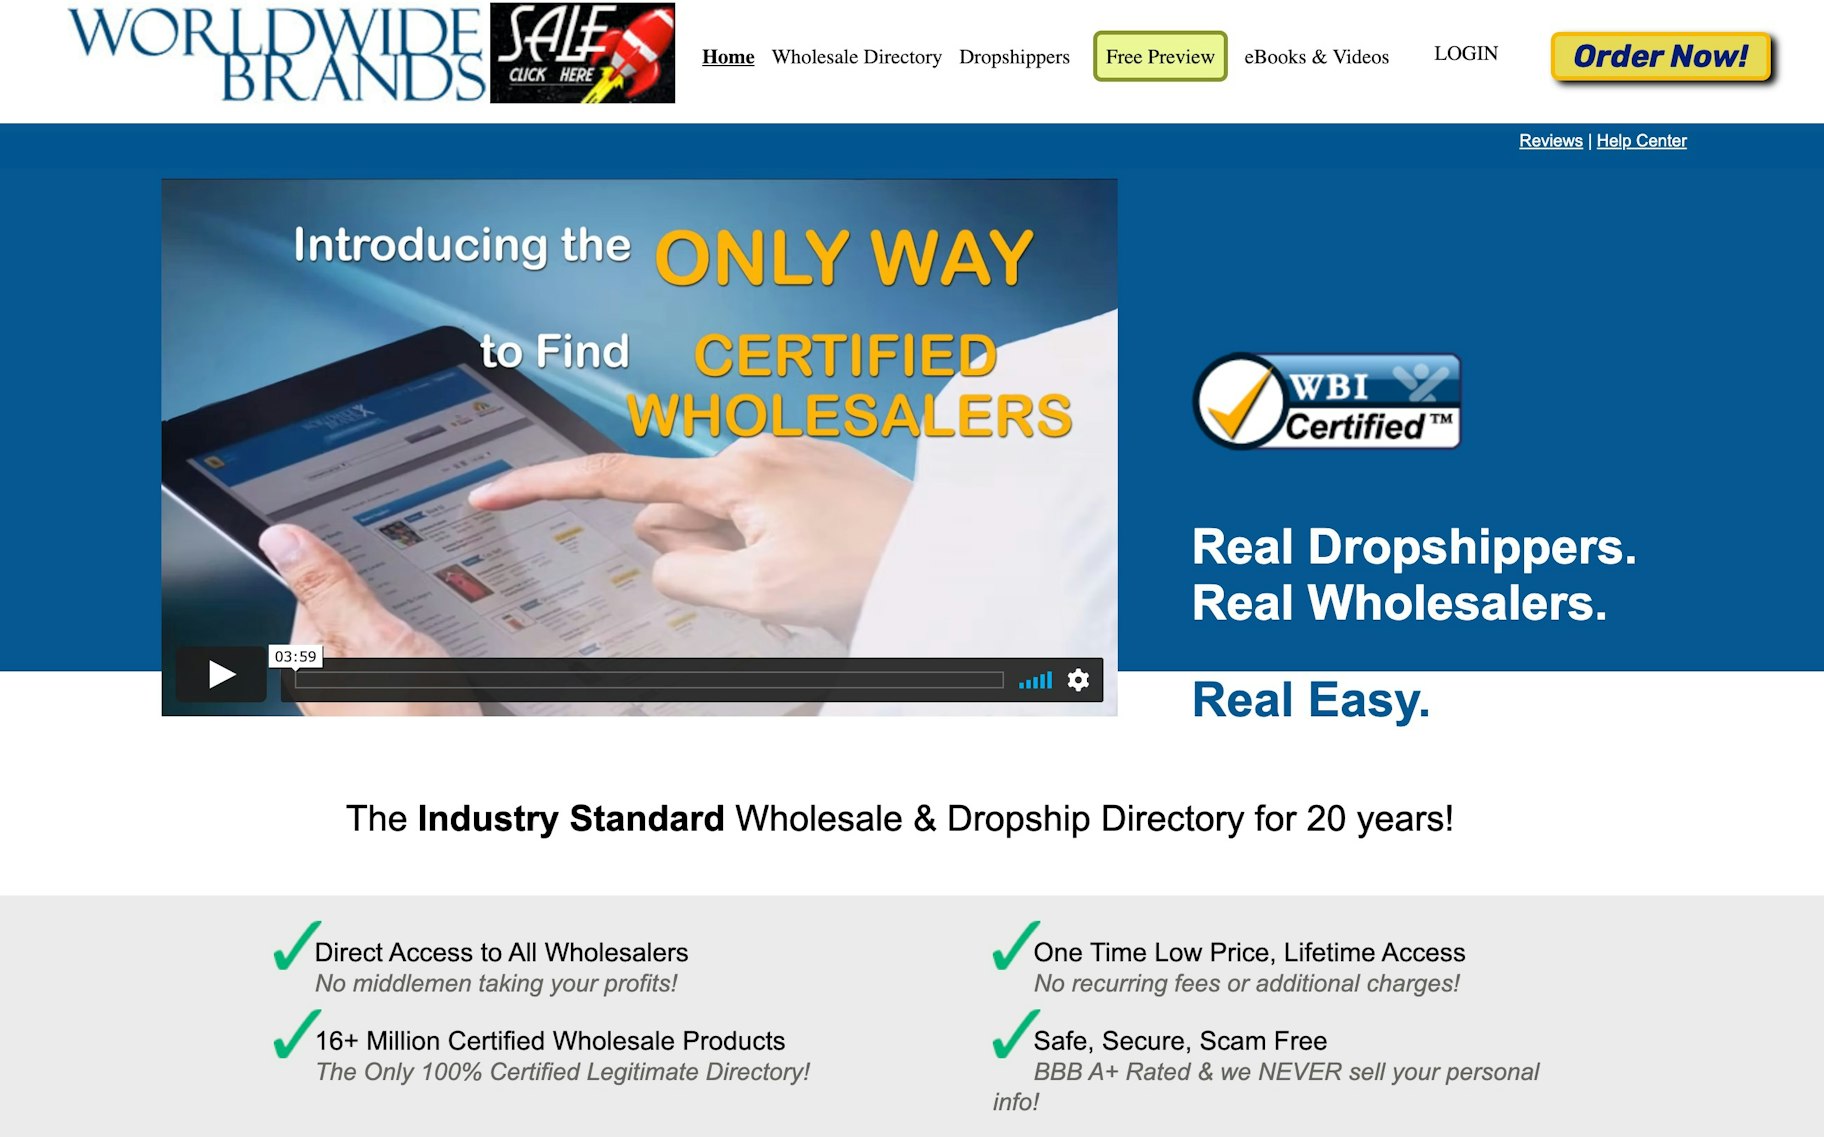 cheapest dropshipping website: Wholesale Central